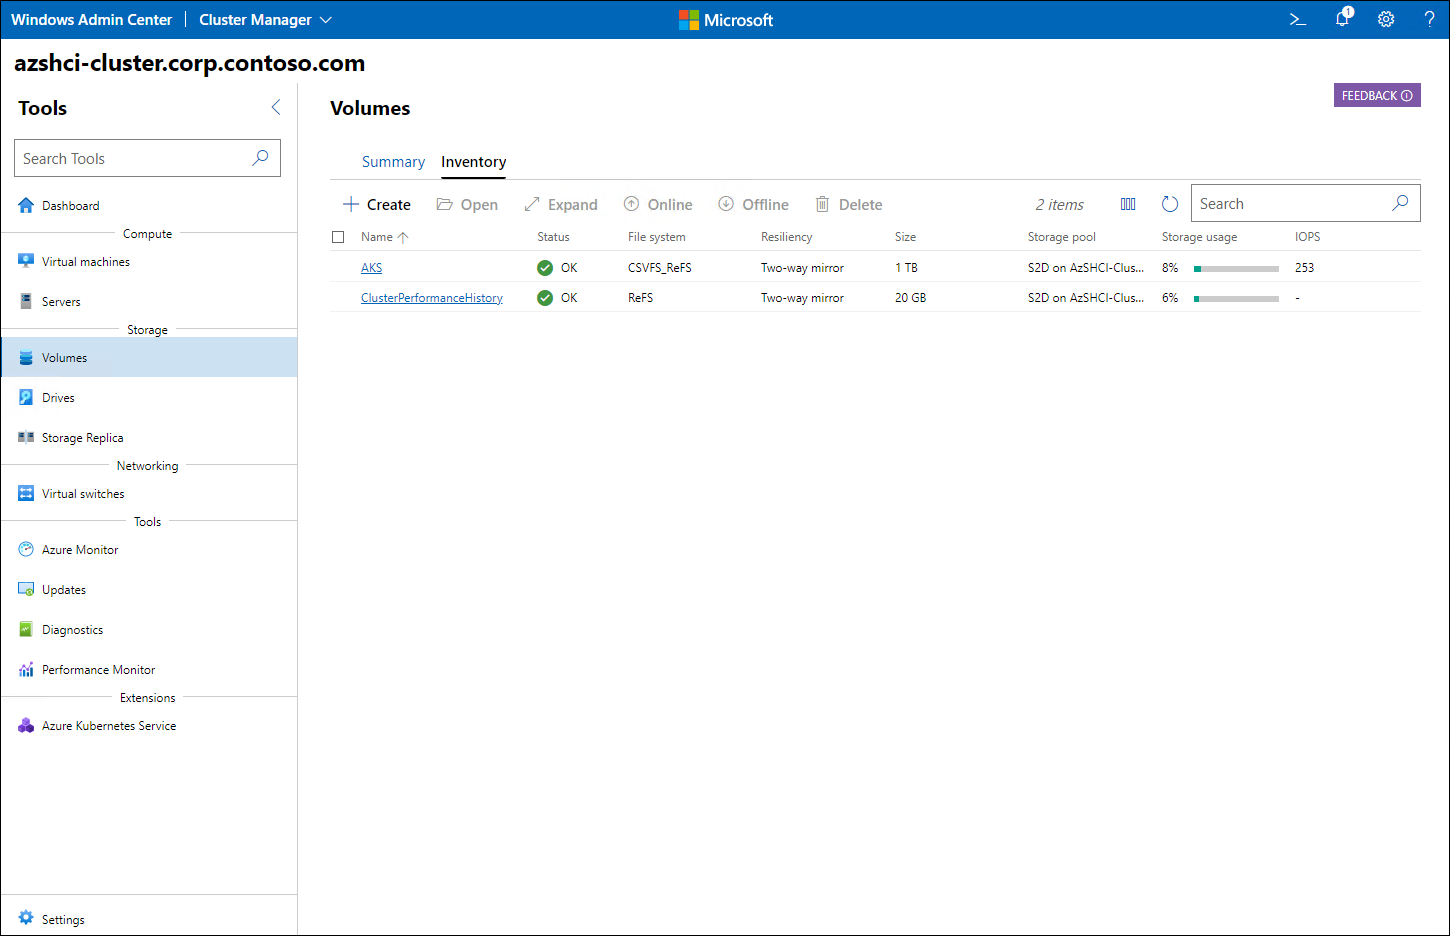 The screenshot depicts the Windows Admin Center interface displaying the listing of volumes with the healthy status, which is labeled OK.